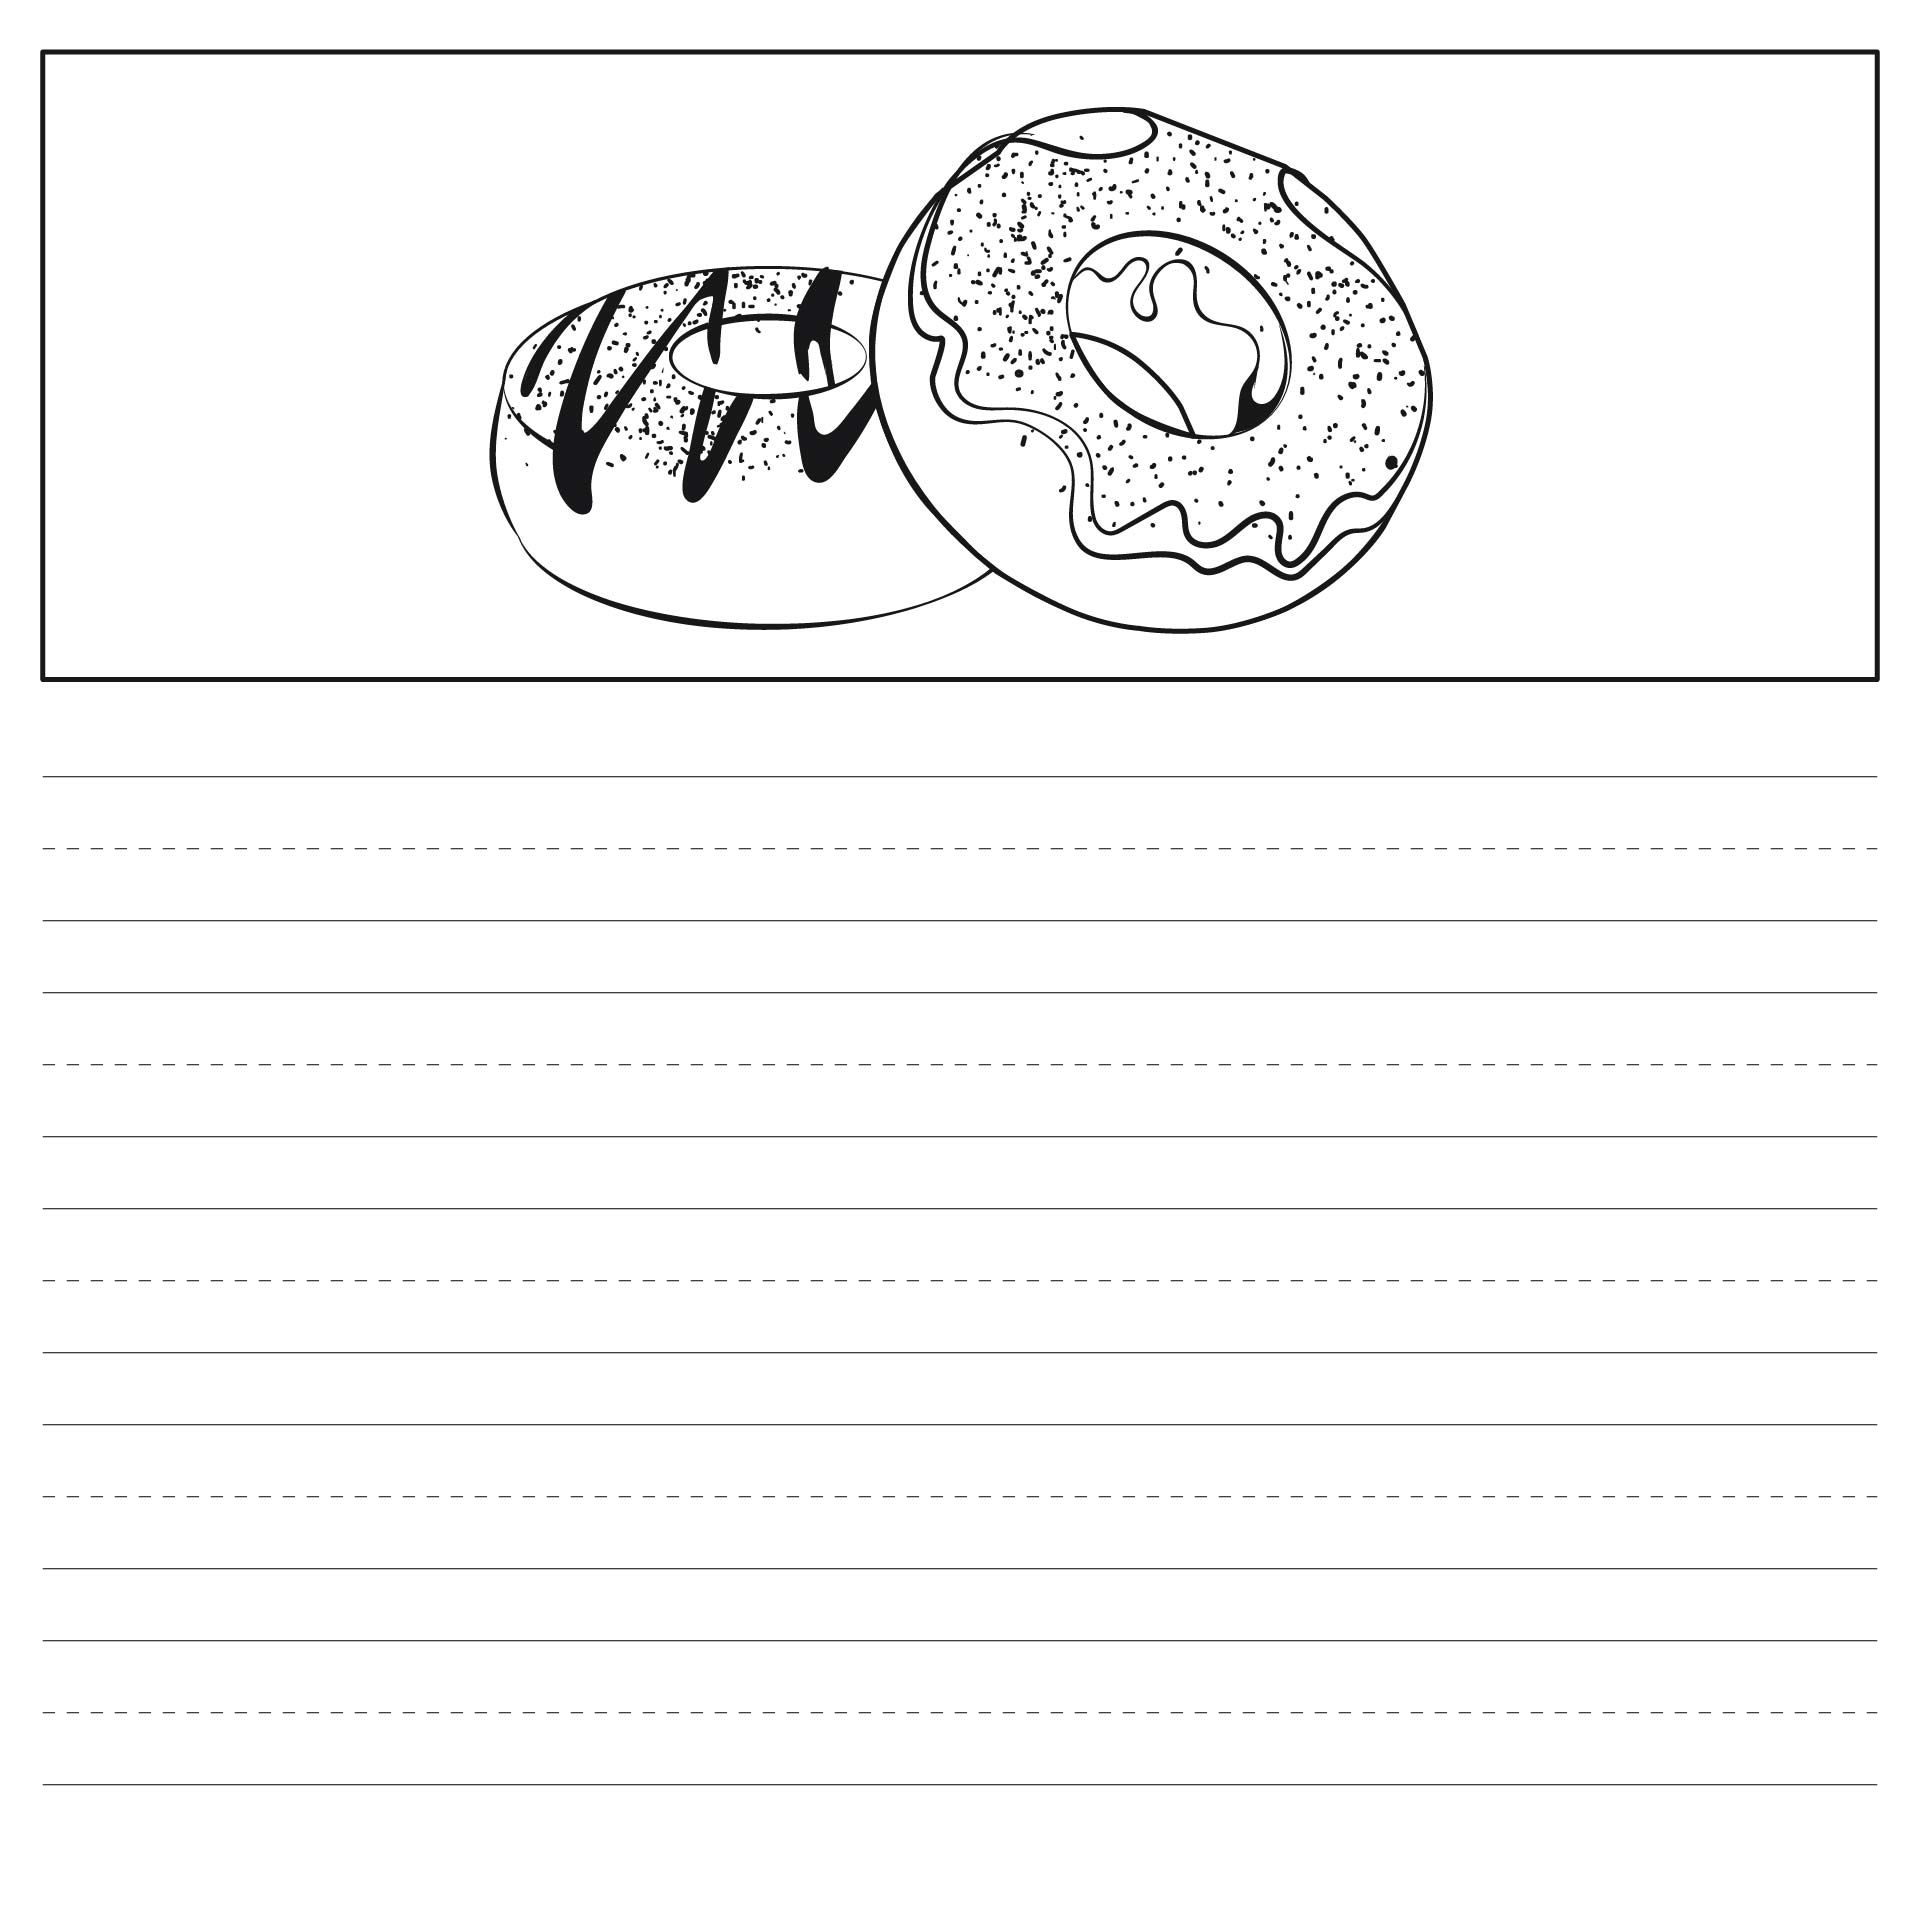 Printable Handwriting Paper With Picture